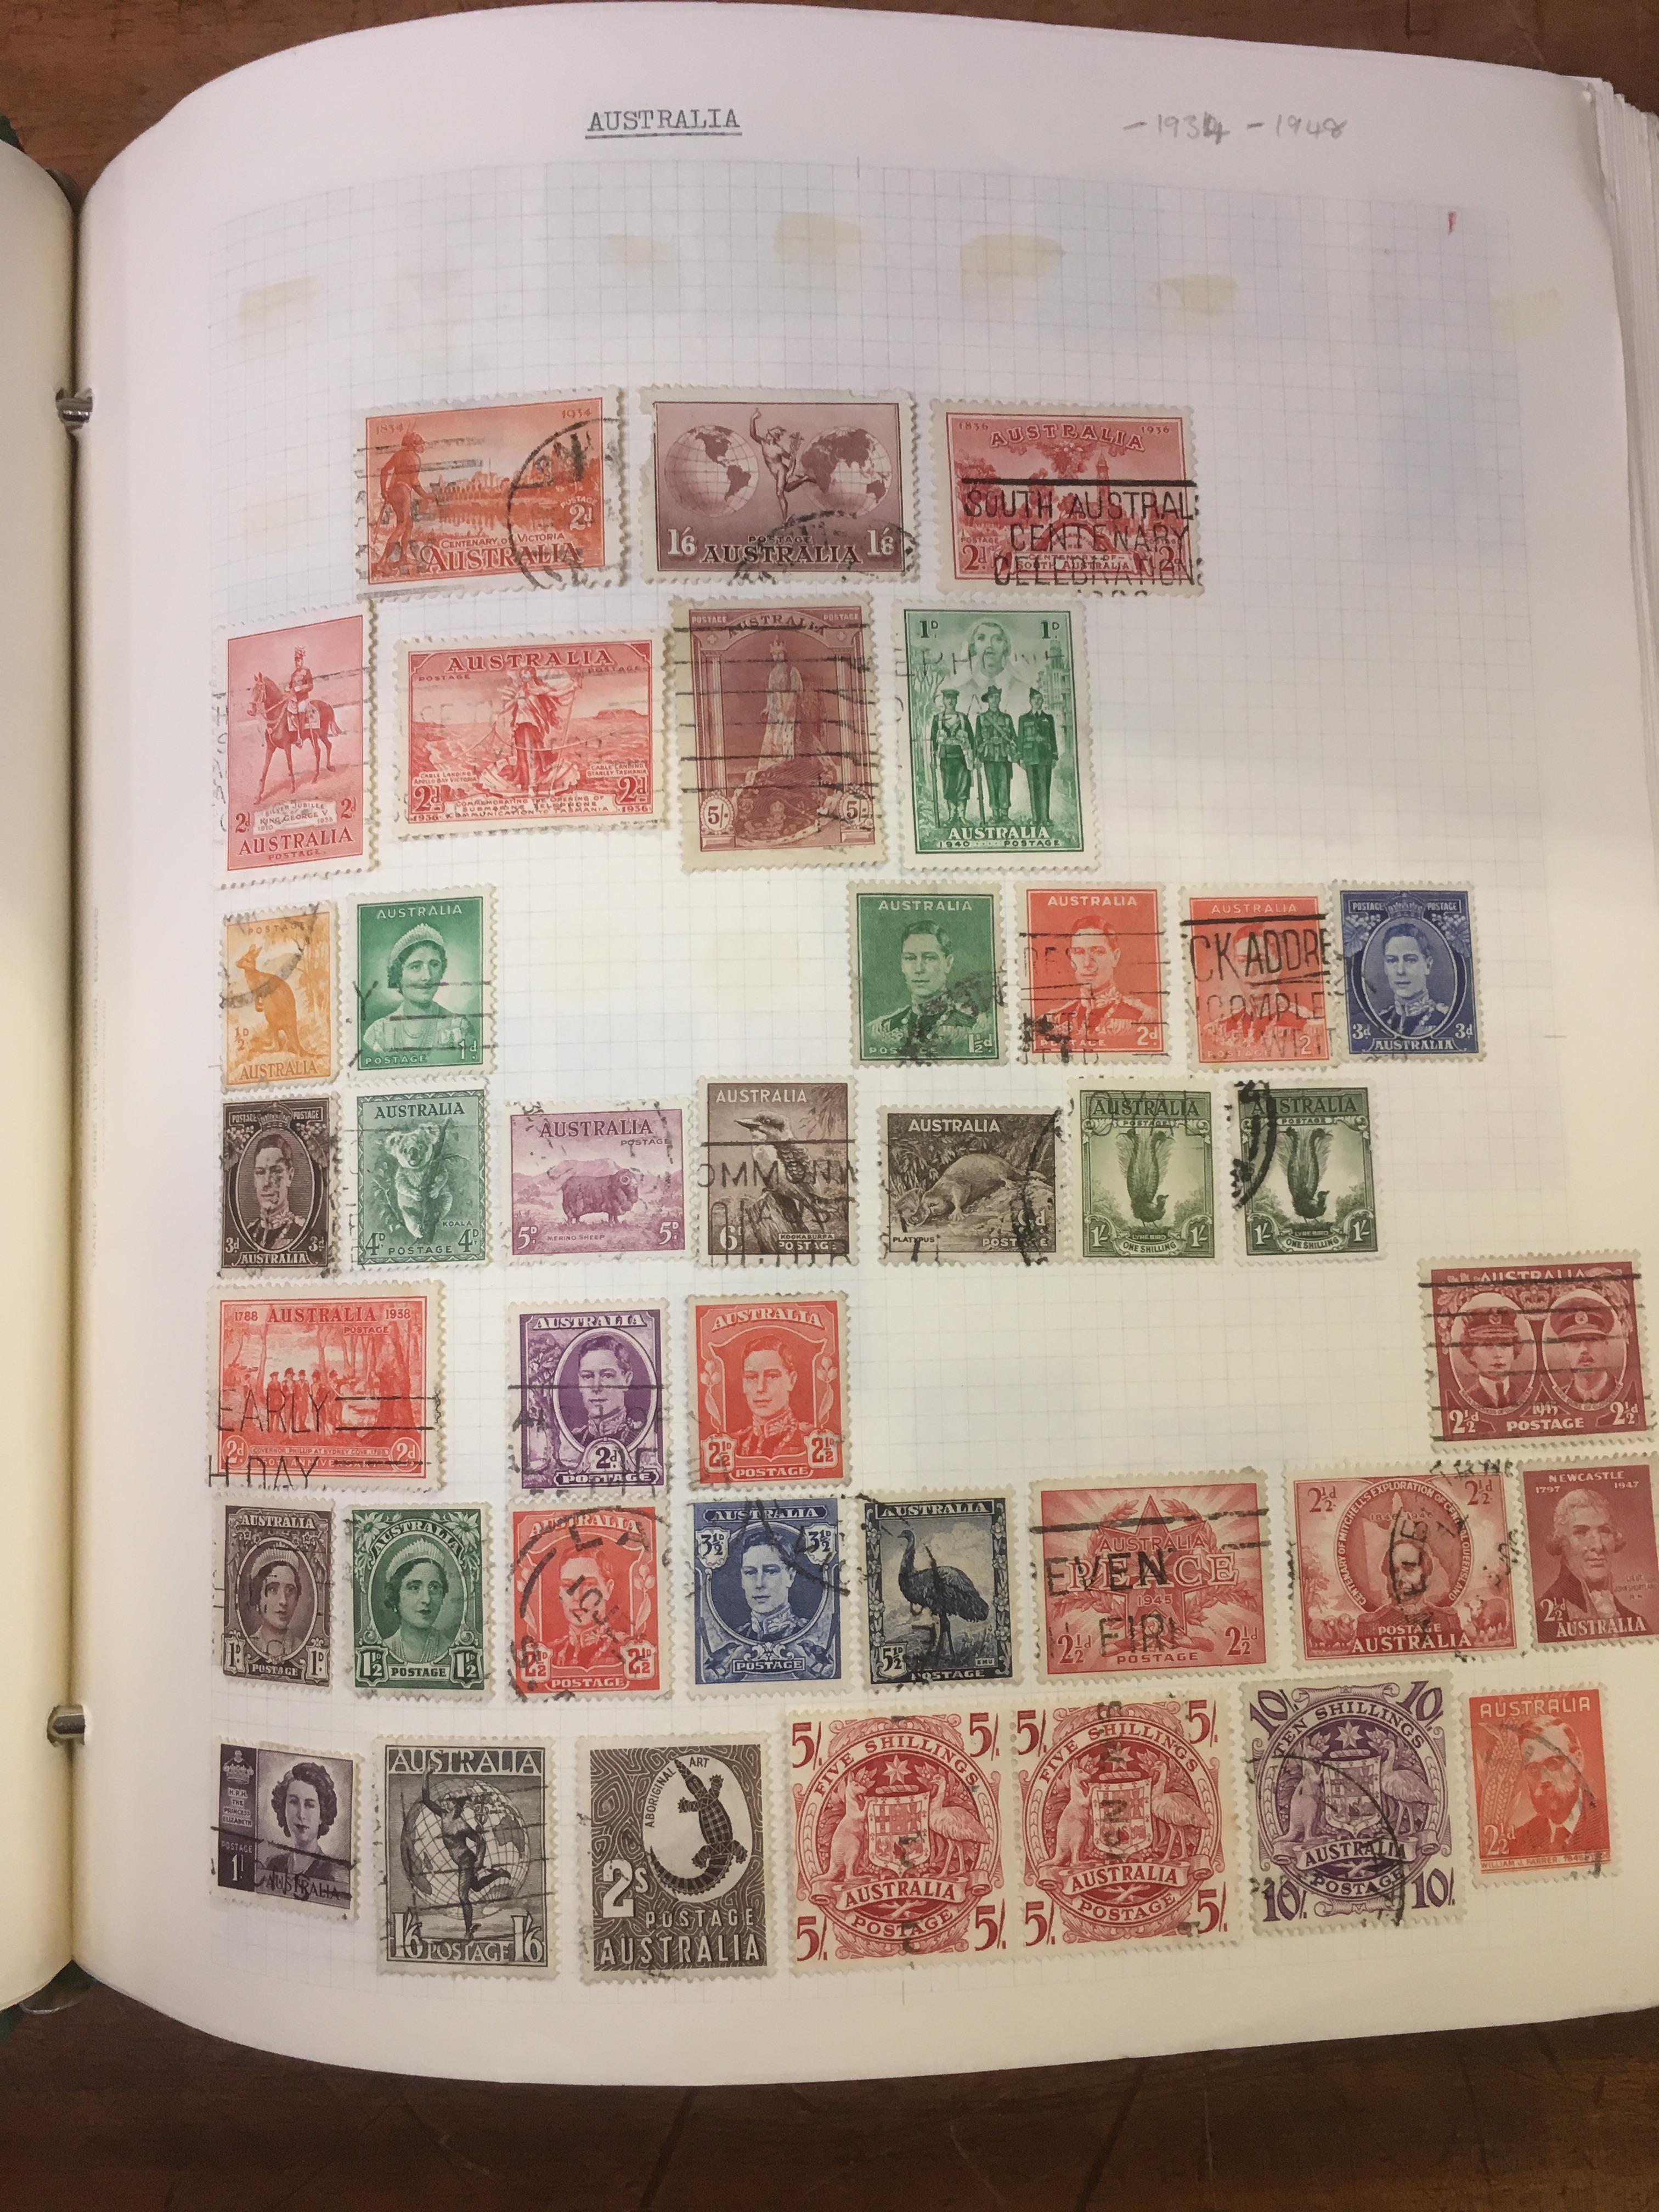 BOX WITH ALL WORLD STAMP COLLECTION IN FOUR "DEVON" ALBUMS ALSO CATALOGUES ETC. - Image 5 of 6